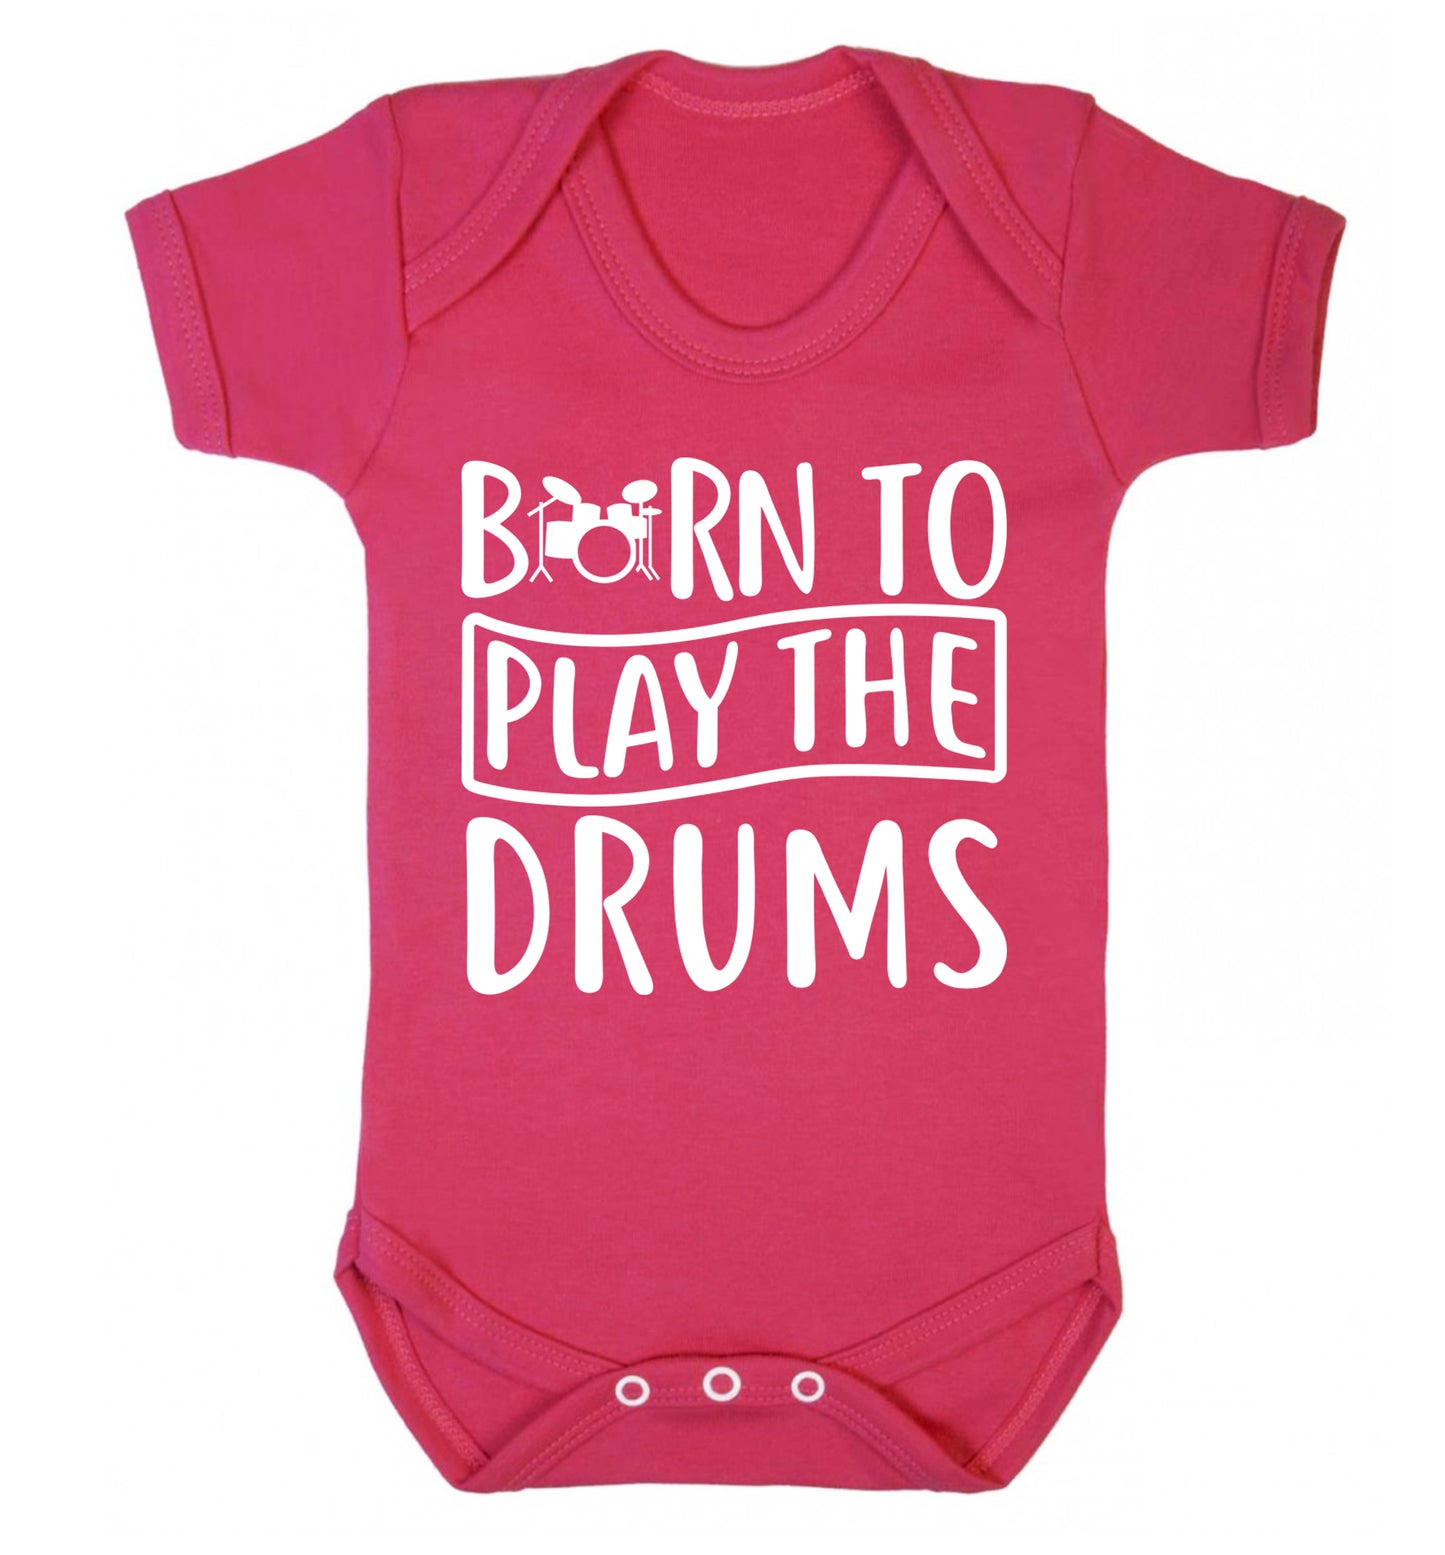 Born to play the drums Baby Vest dark pink 18-24 months